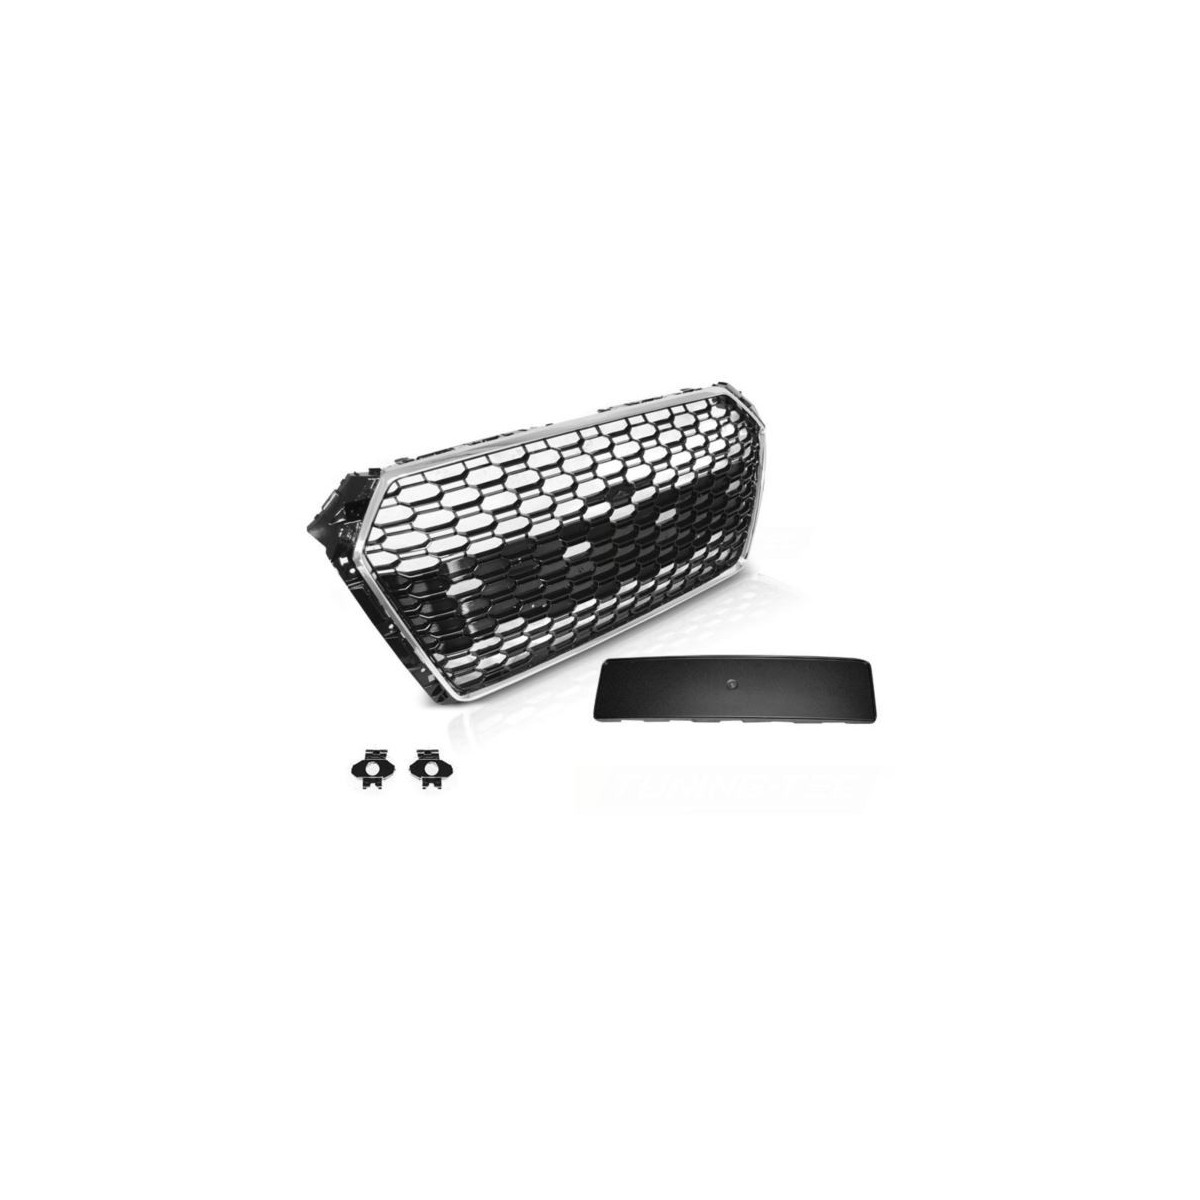 GRILL AUDI A4 B9 15-19 CHROME BLACK RS4 STYLE PDC